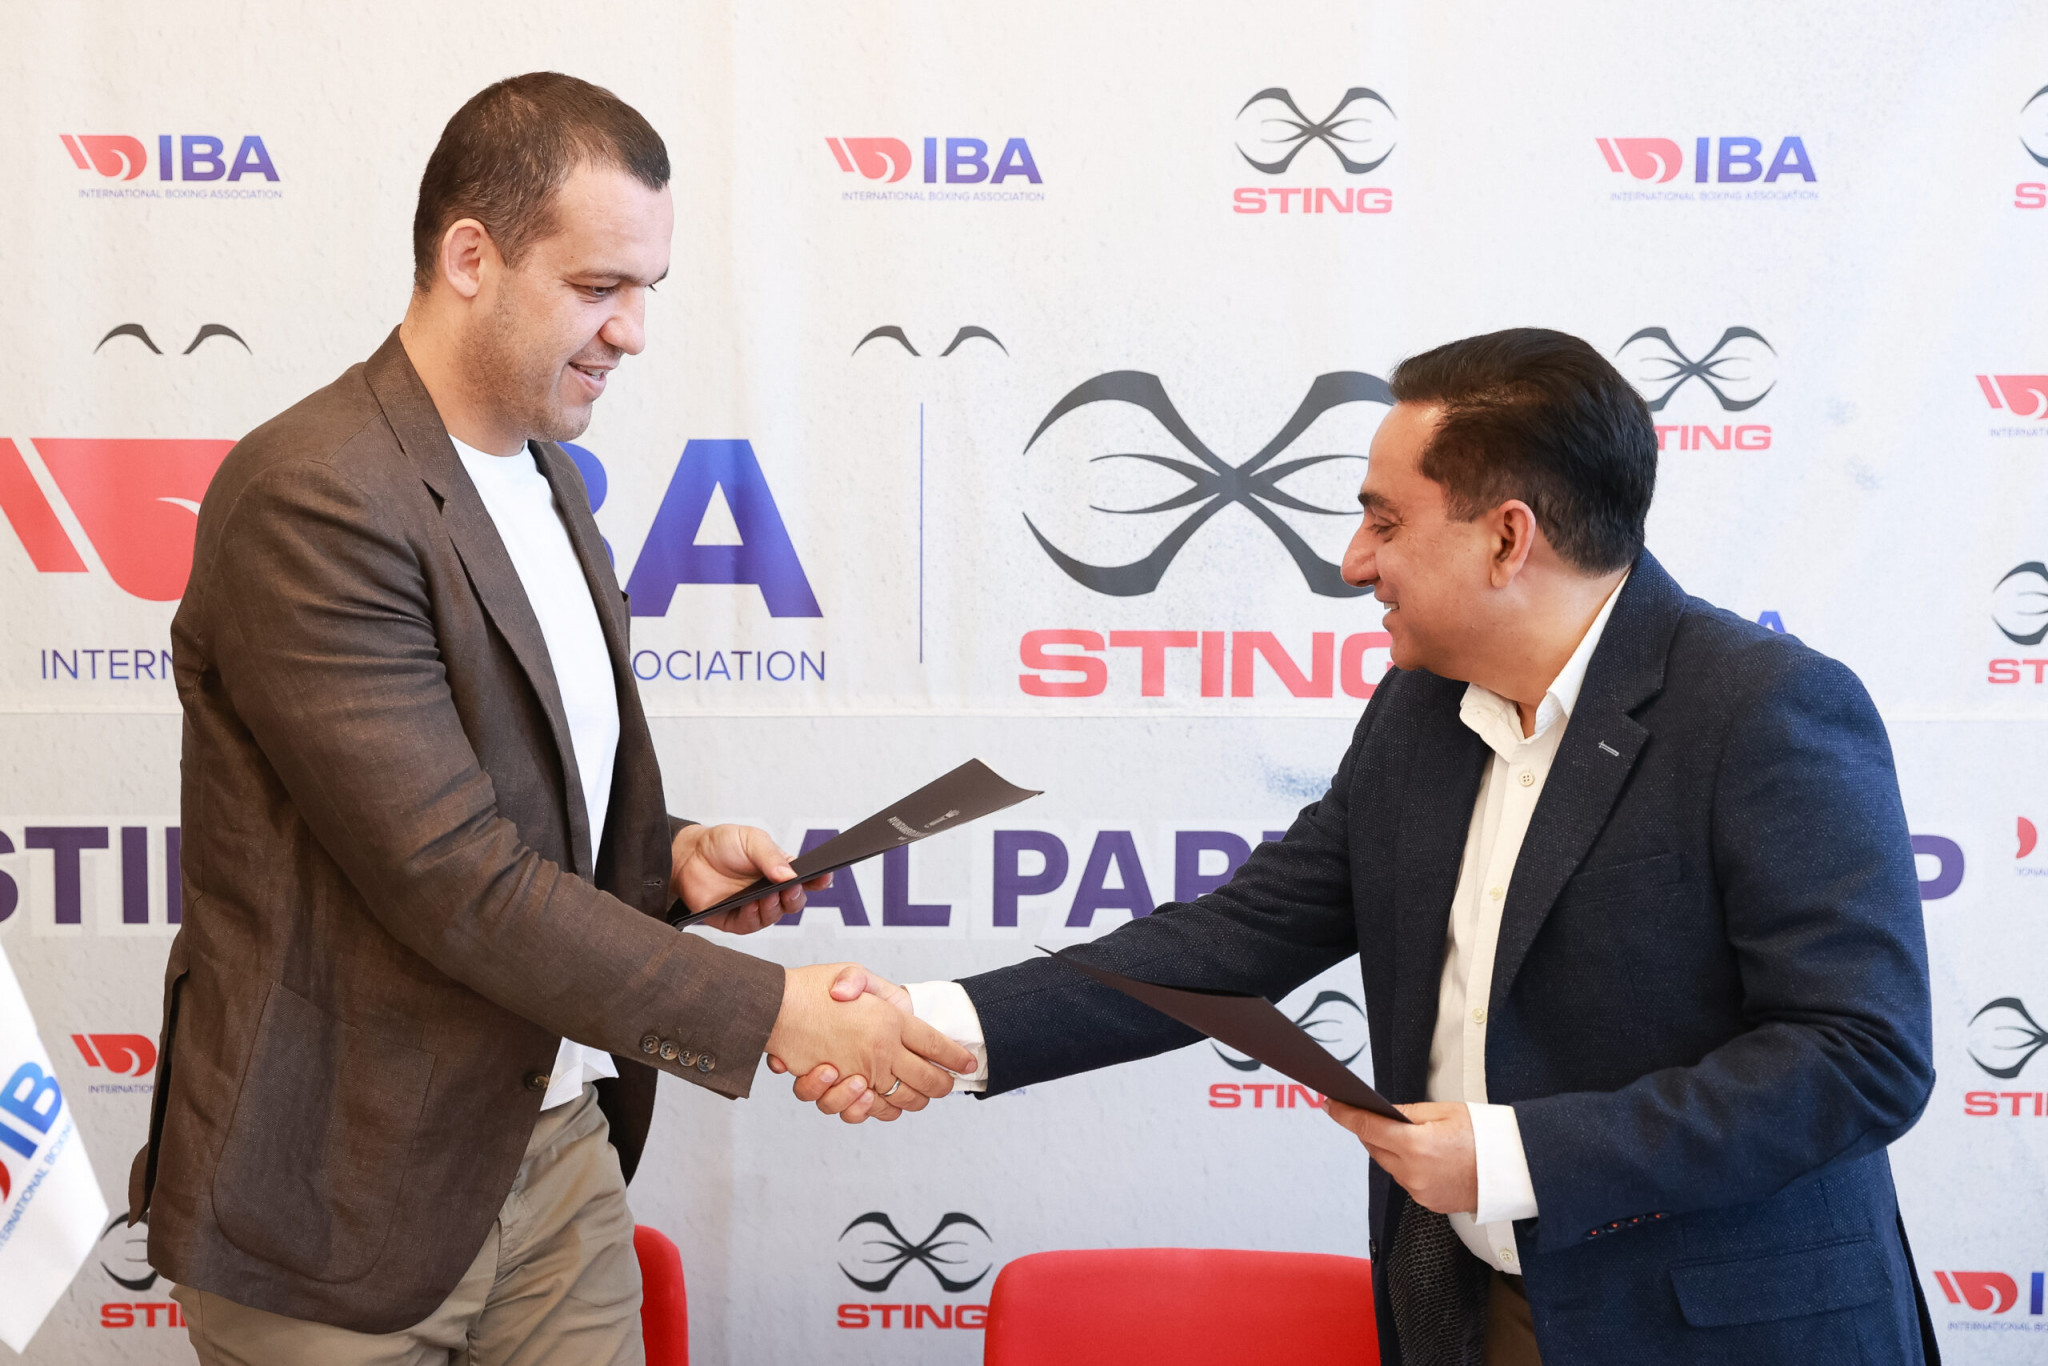 The International Boxing Association's partnership with Sting is due to run from 2023 until the end of 2028 ©IBA